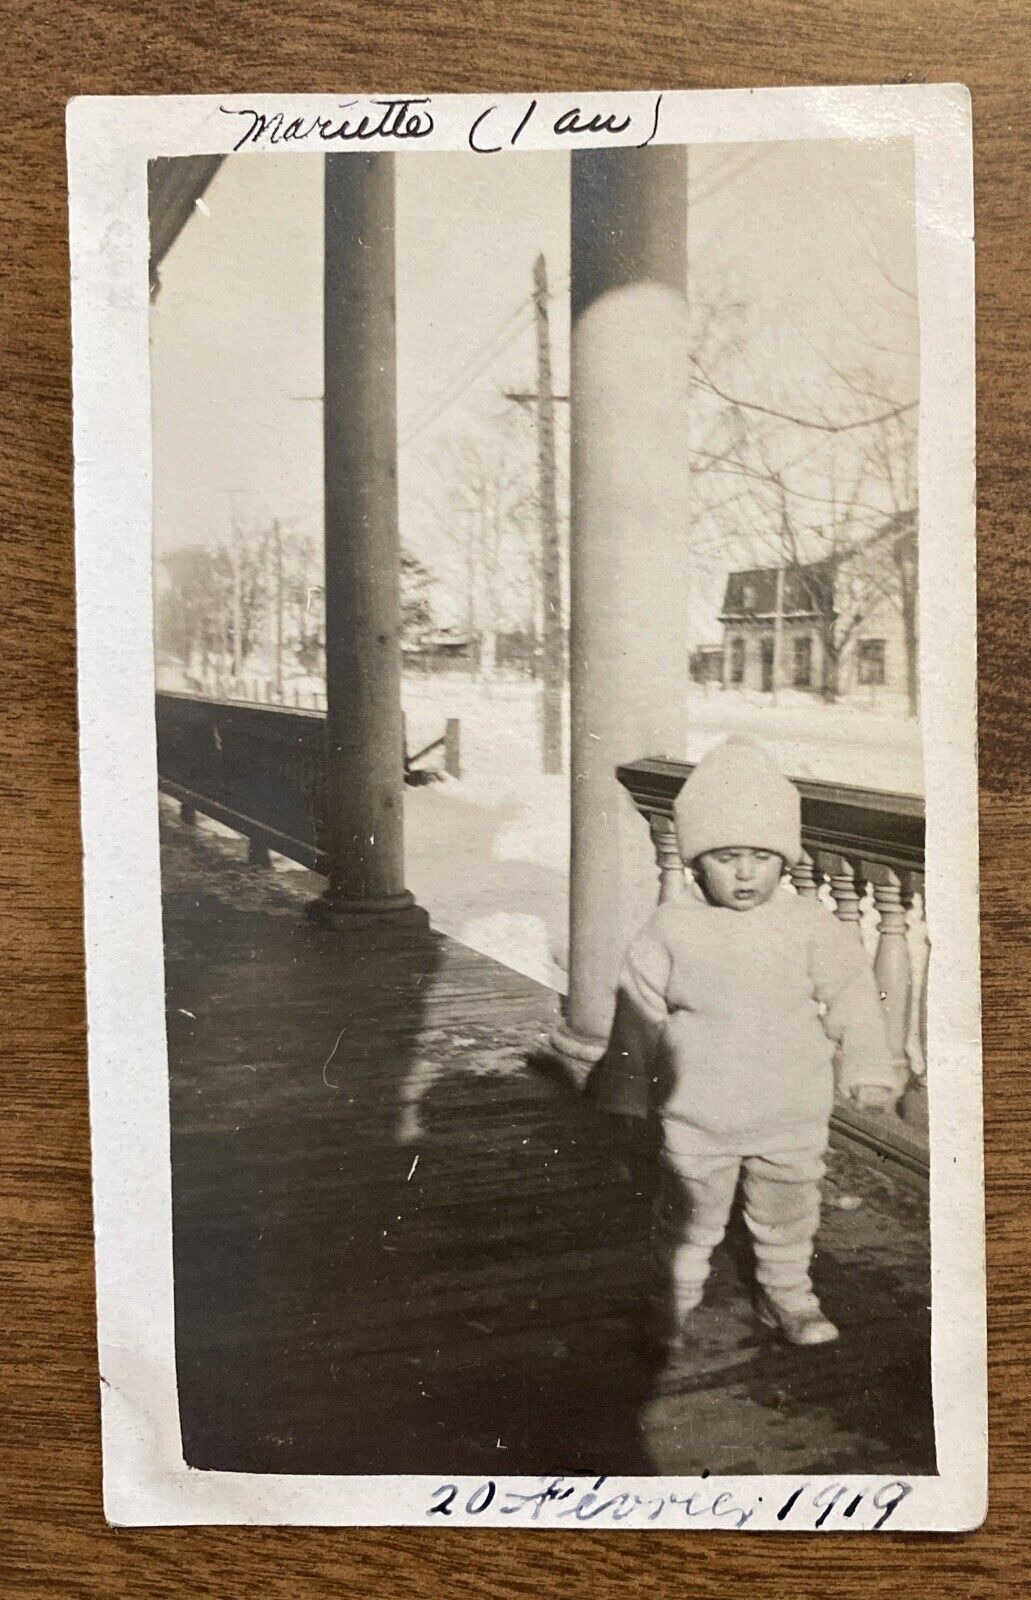 1919 Baby Toddler Infant Young Child Porch Snow Winter Time February Photo P10y6